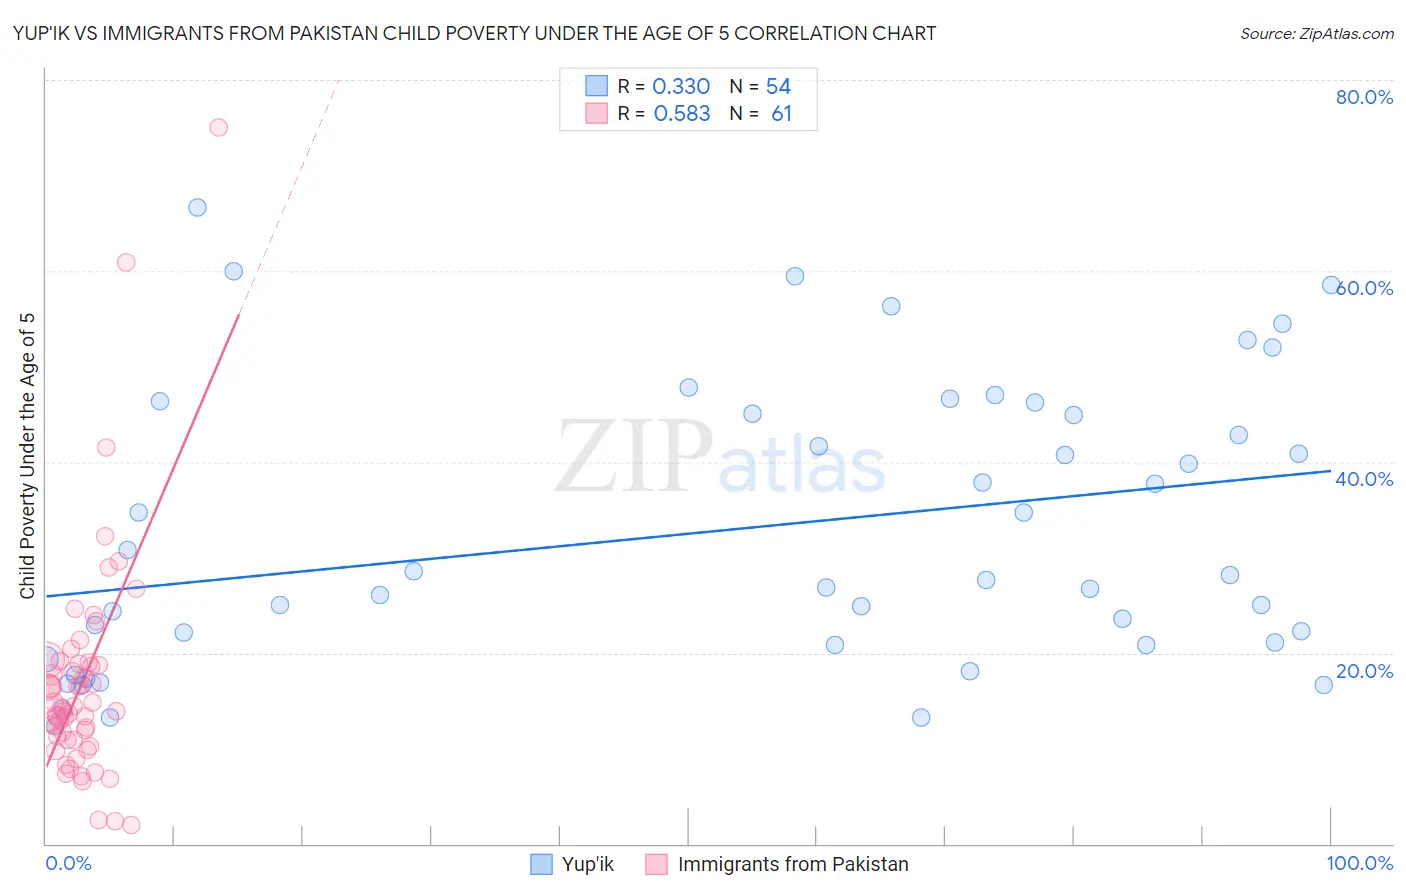 Yup'ik vs Immigrants from Pakistan Child Poverty Under the Age of 5